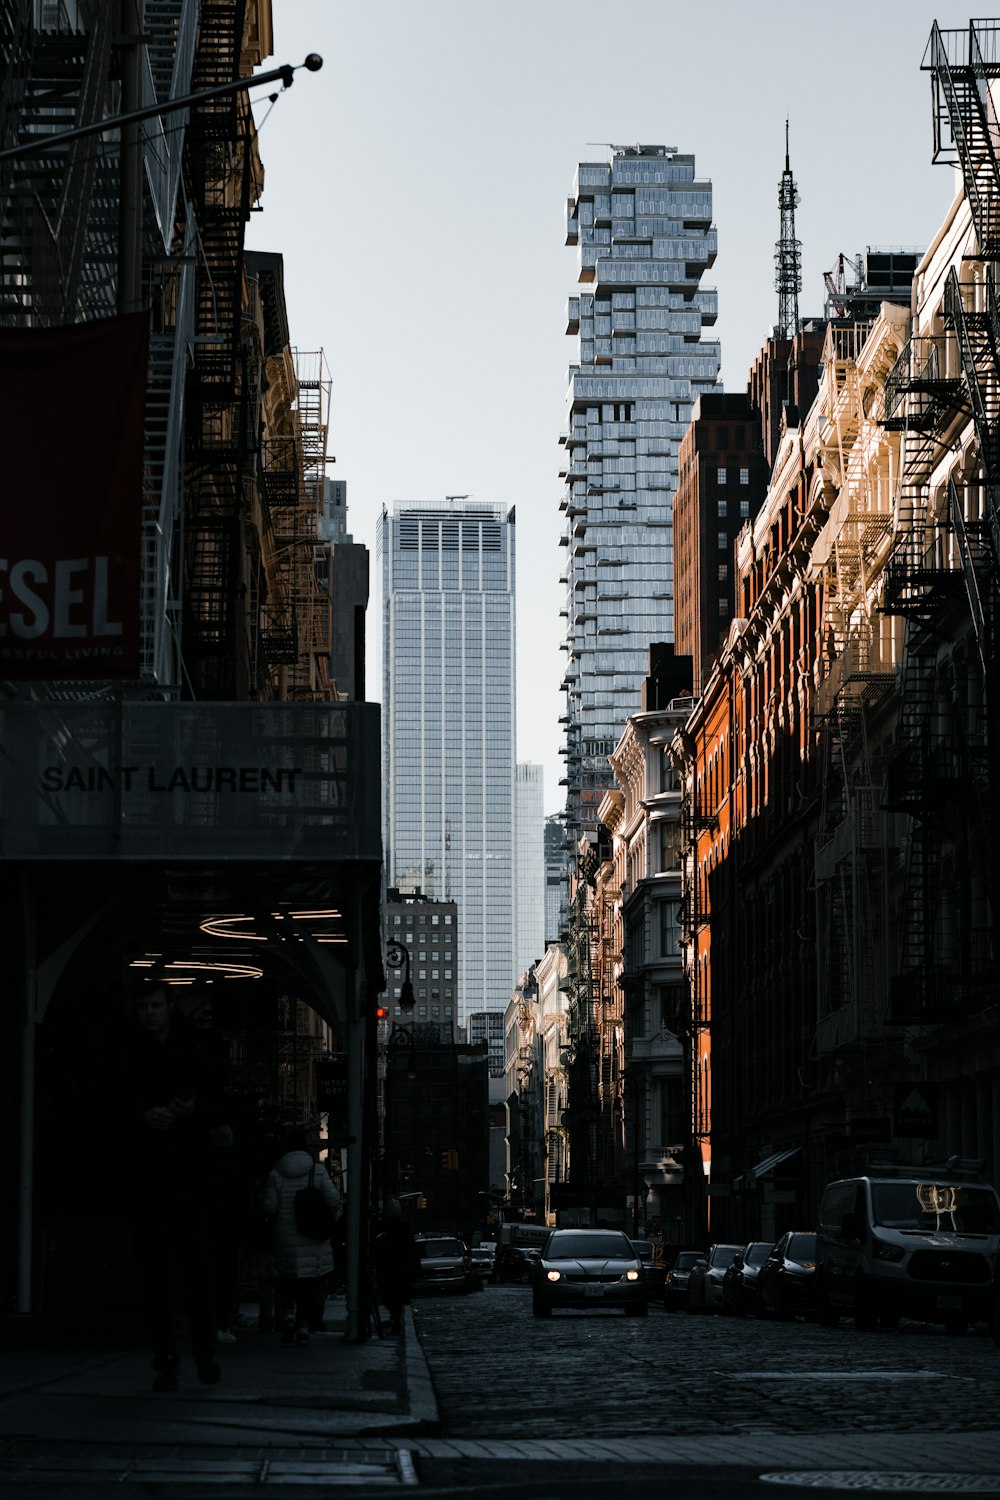 a city street with tall buildings in the background